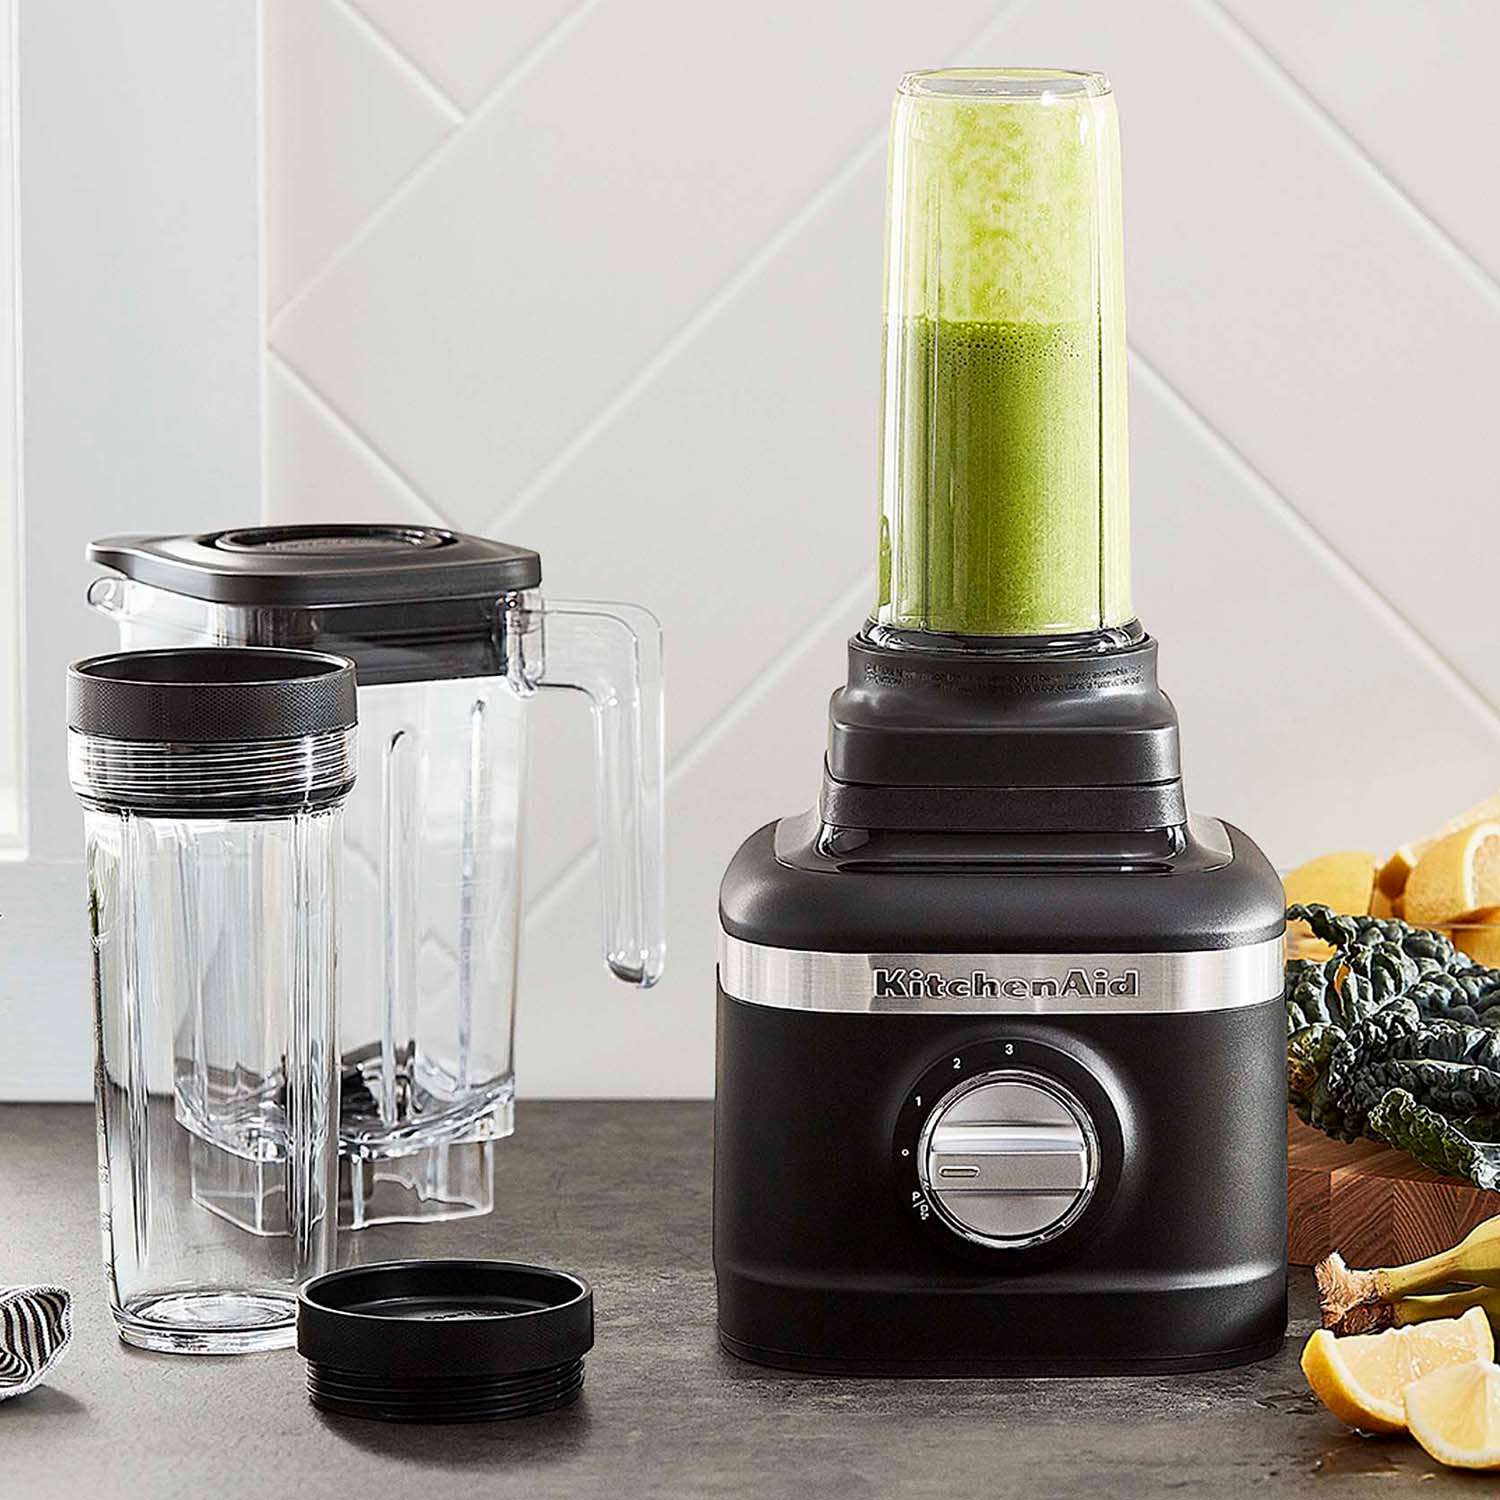 how to choose a blender, blender buying guide, what to look for in a blender, 